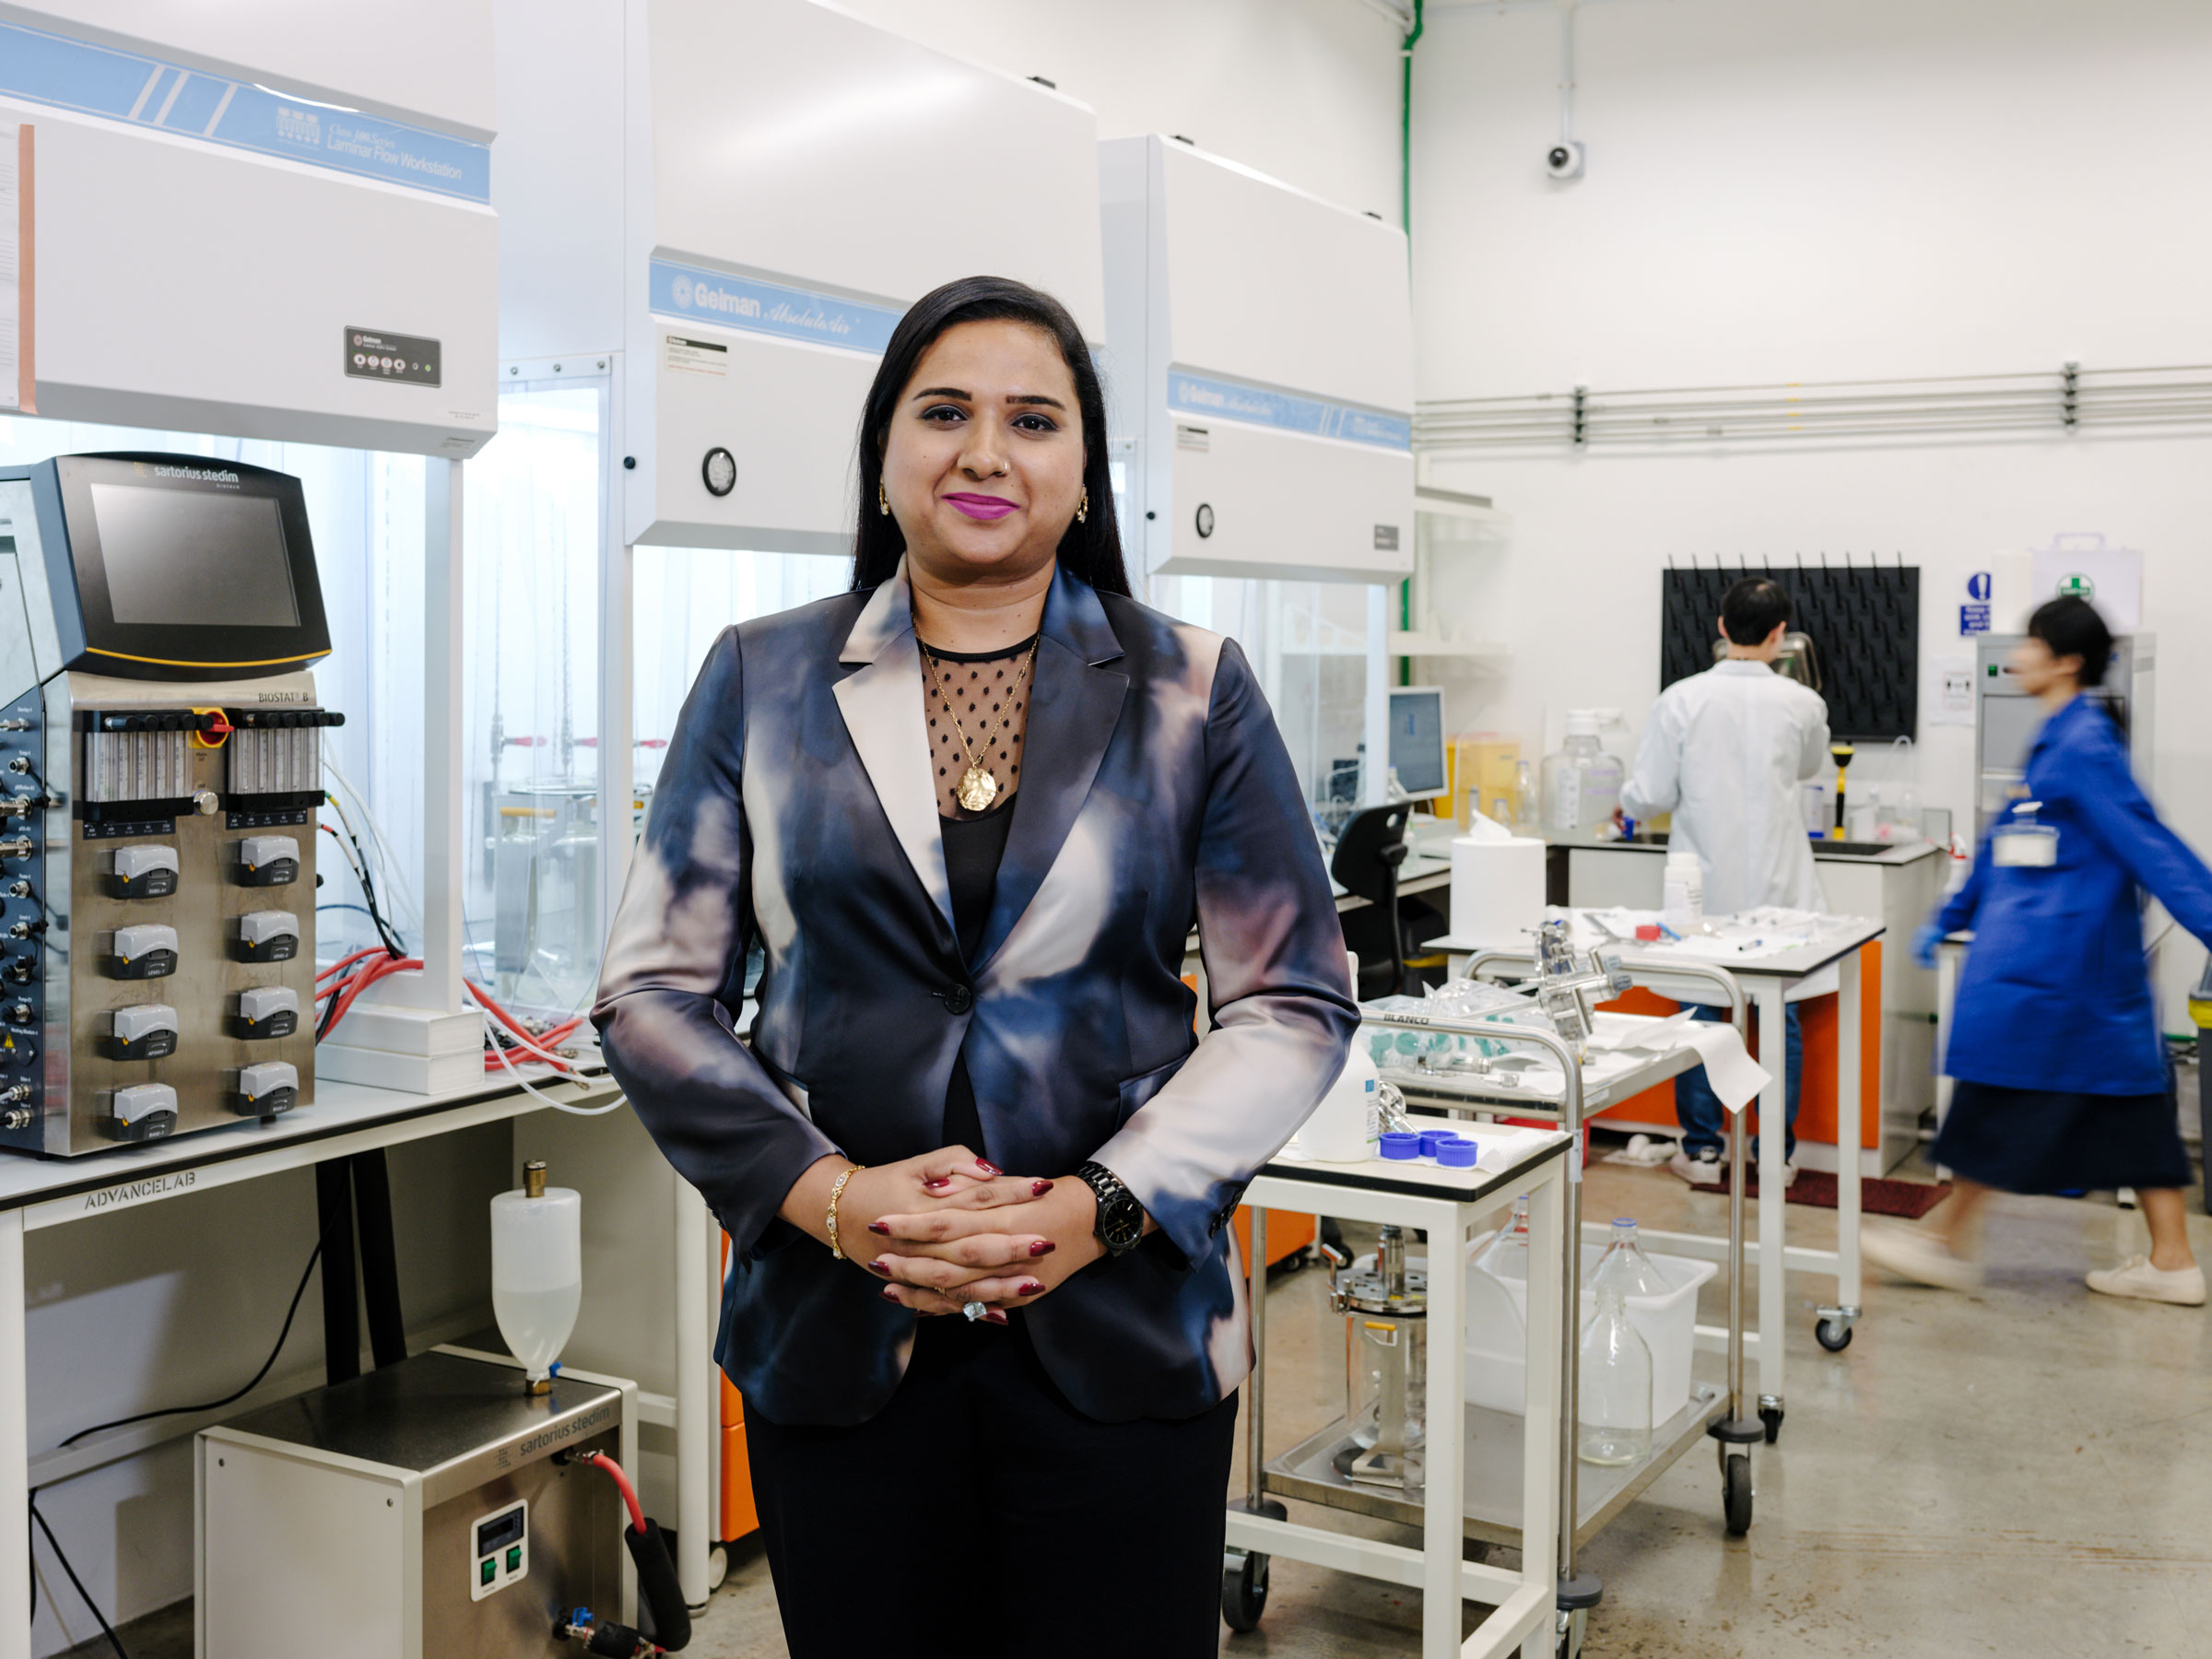 Sandhya Sriram, Group CEO ands Co-Founder of Shiok Meats, seen here in their R&amp;D laboratory on Nov. 11. (Mindy Tan for TIME)